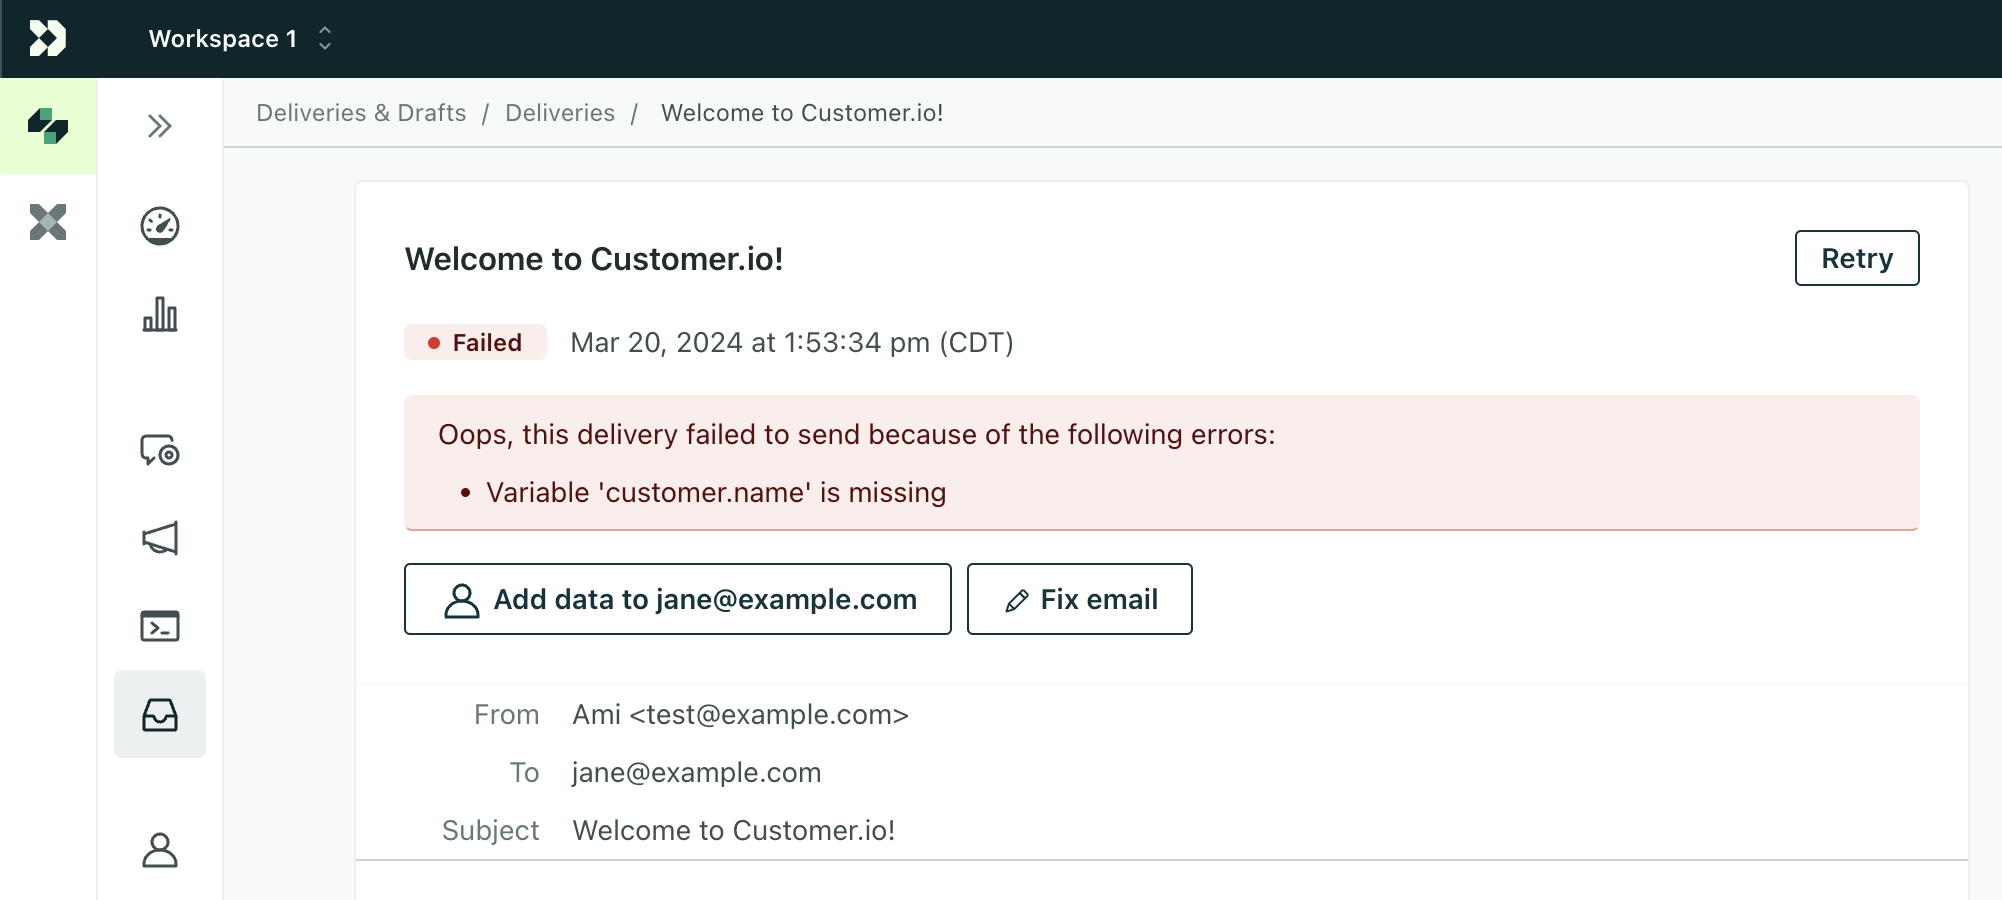 In the top left of a delivery detail page for a failed message, there is an error outlined in red.